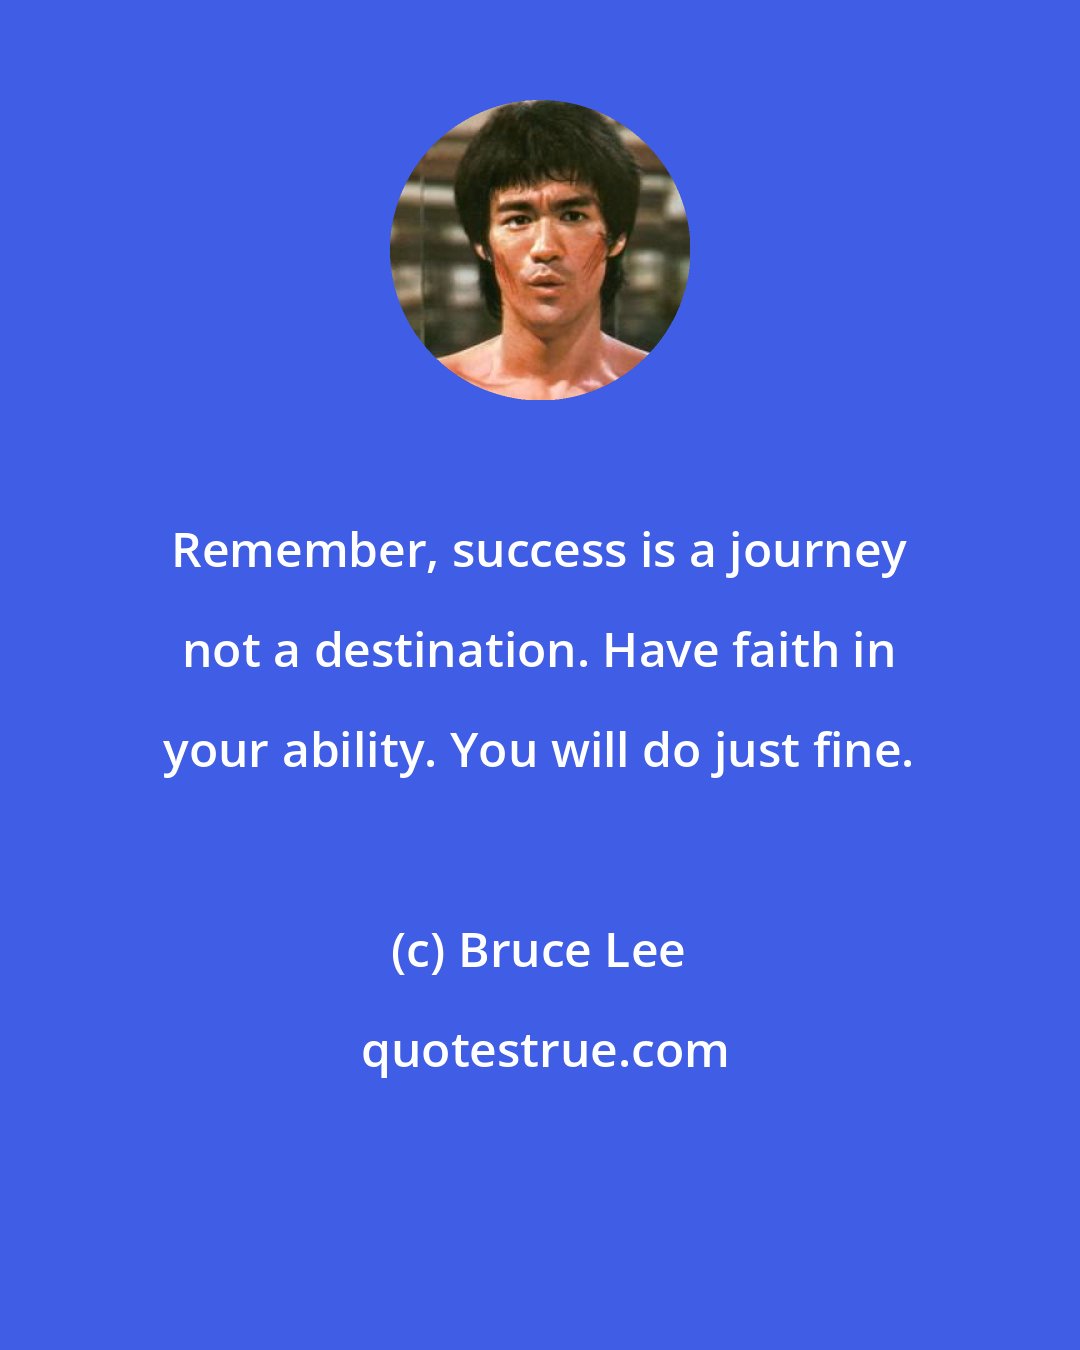 Bruce Lee: Remember, success is a journey not a destination. Have faith in your ability. You will do just fine.